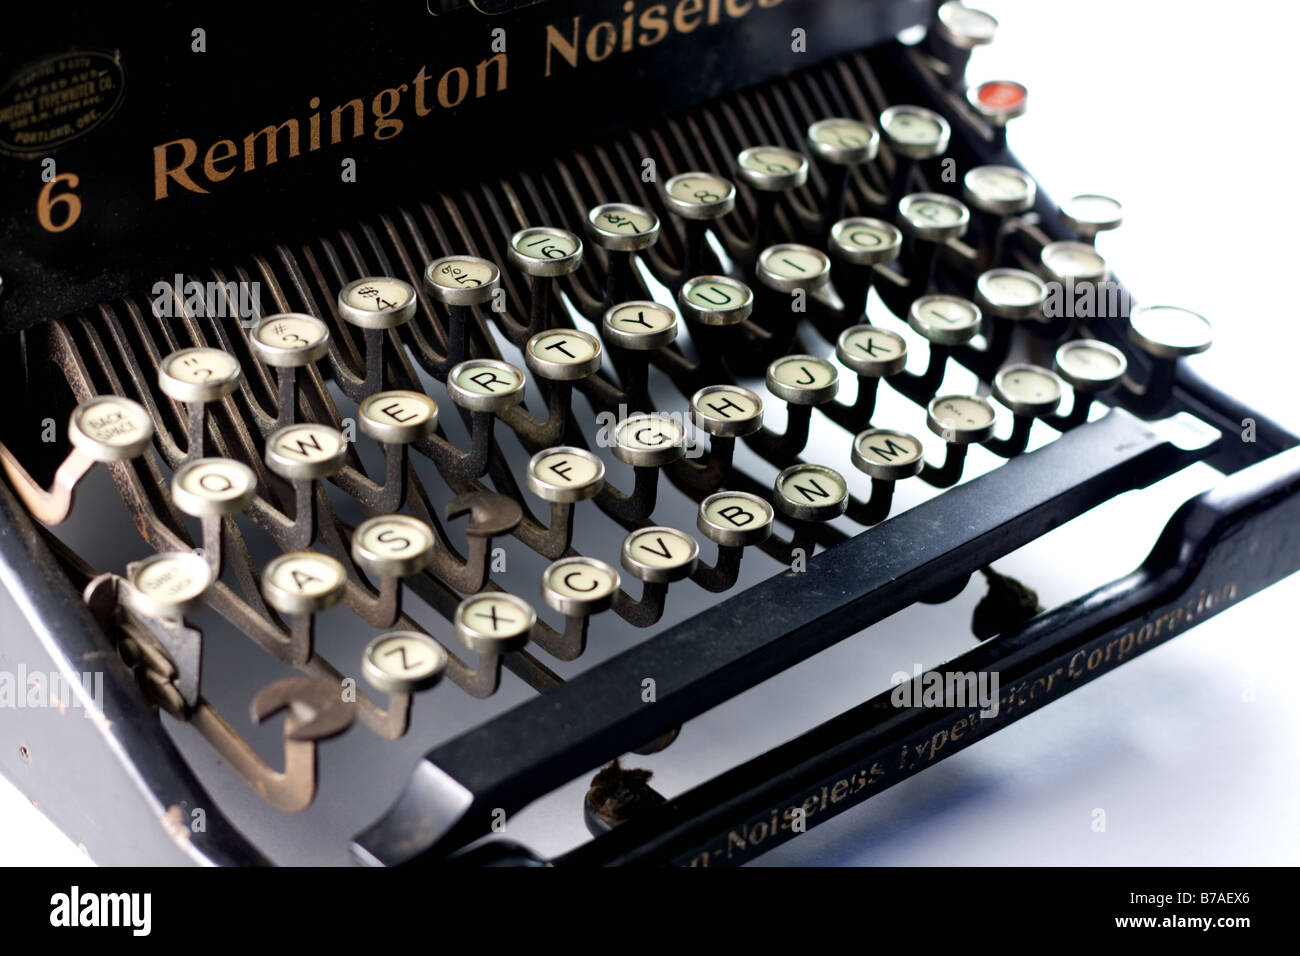 Full keyboard from a vintage typewriter at an angle Stock Photo